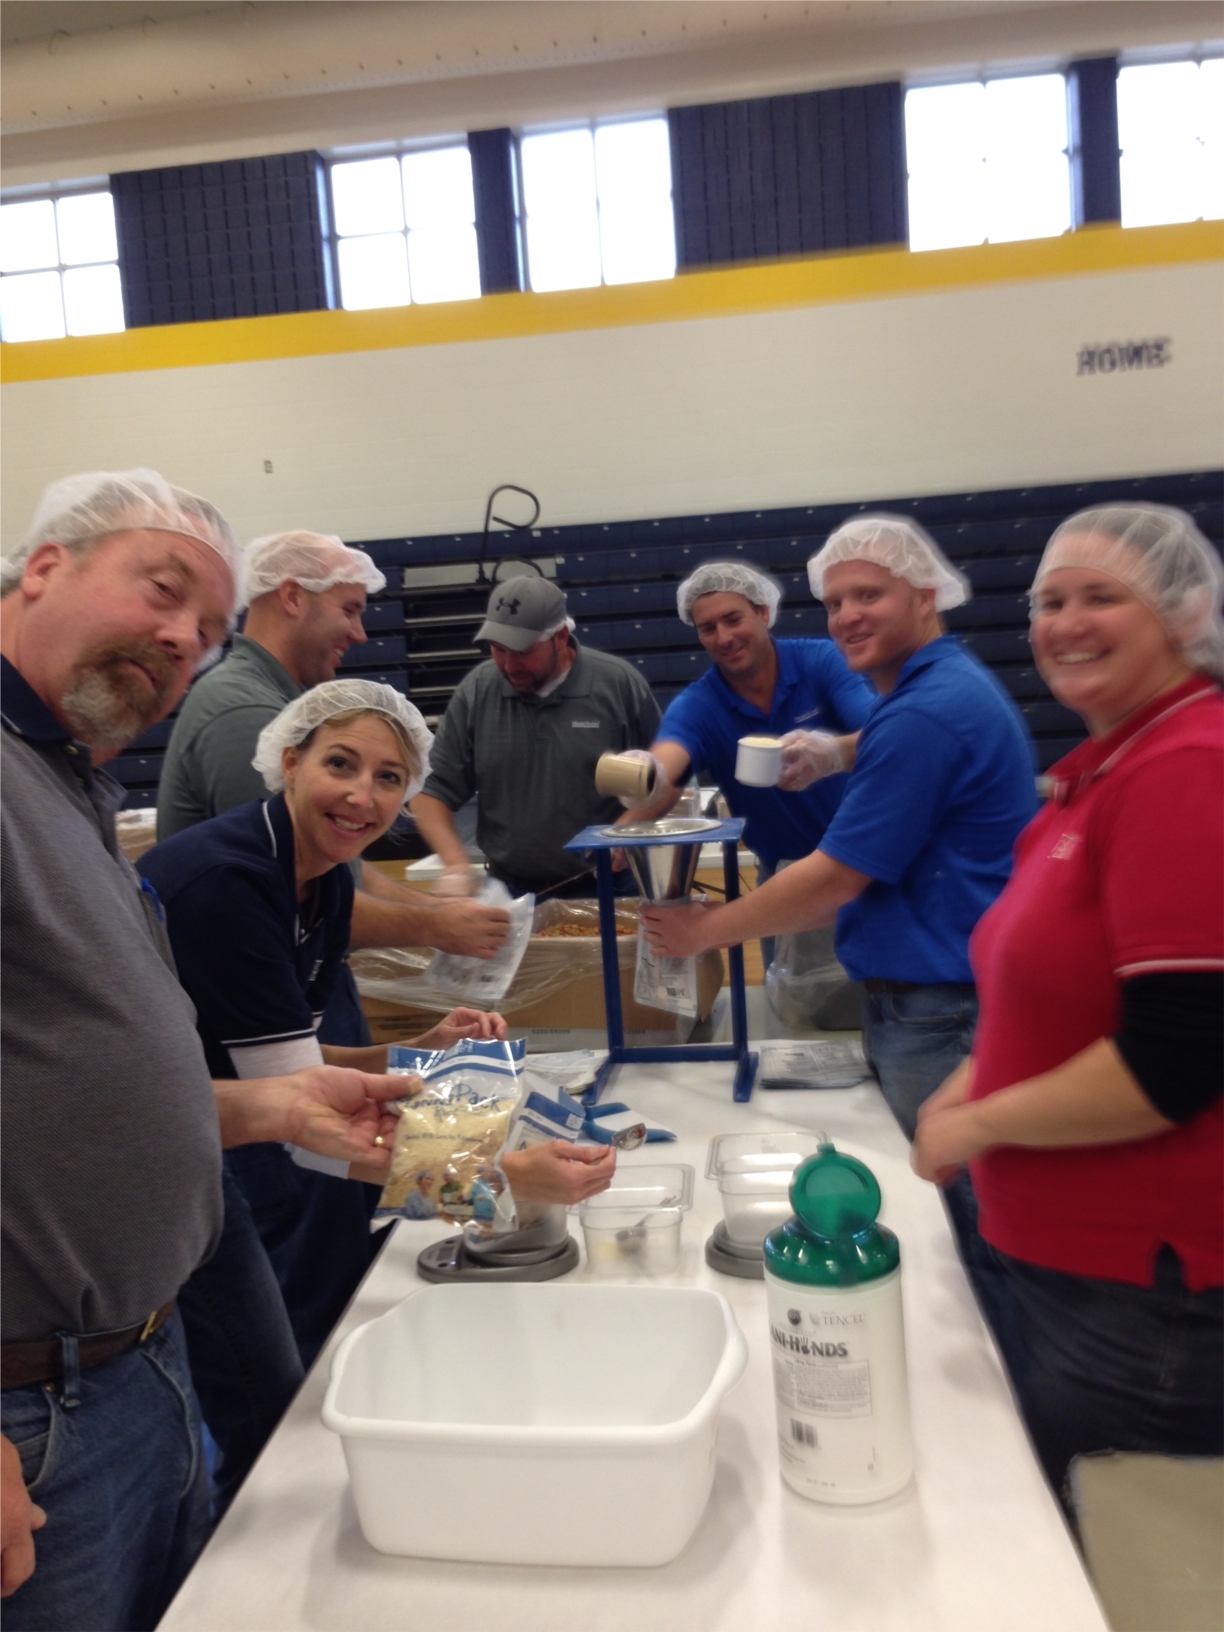 Wayne Homes' Bowling Green team donated their time to the Million Meal Alliance MobilePack to help fight hunger around the world.